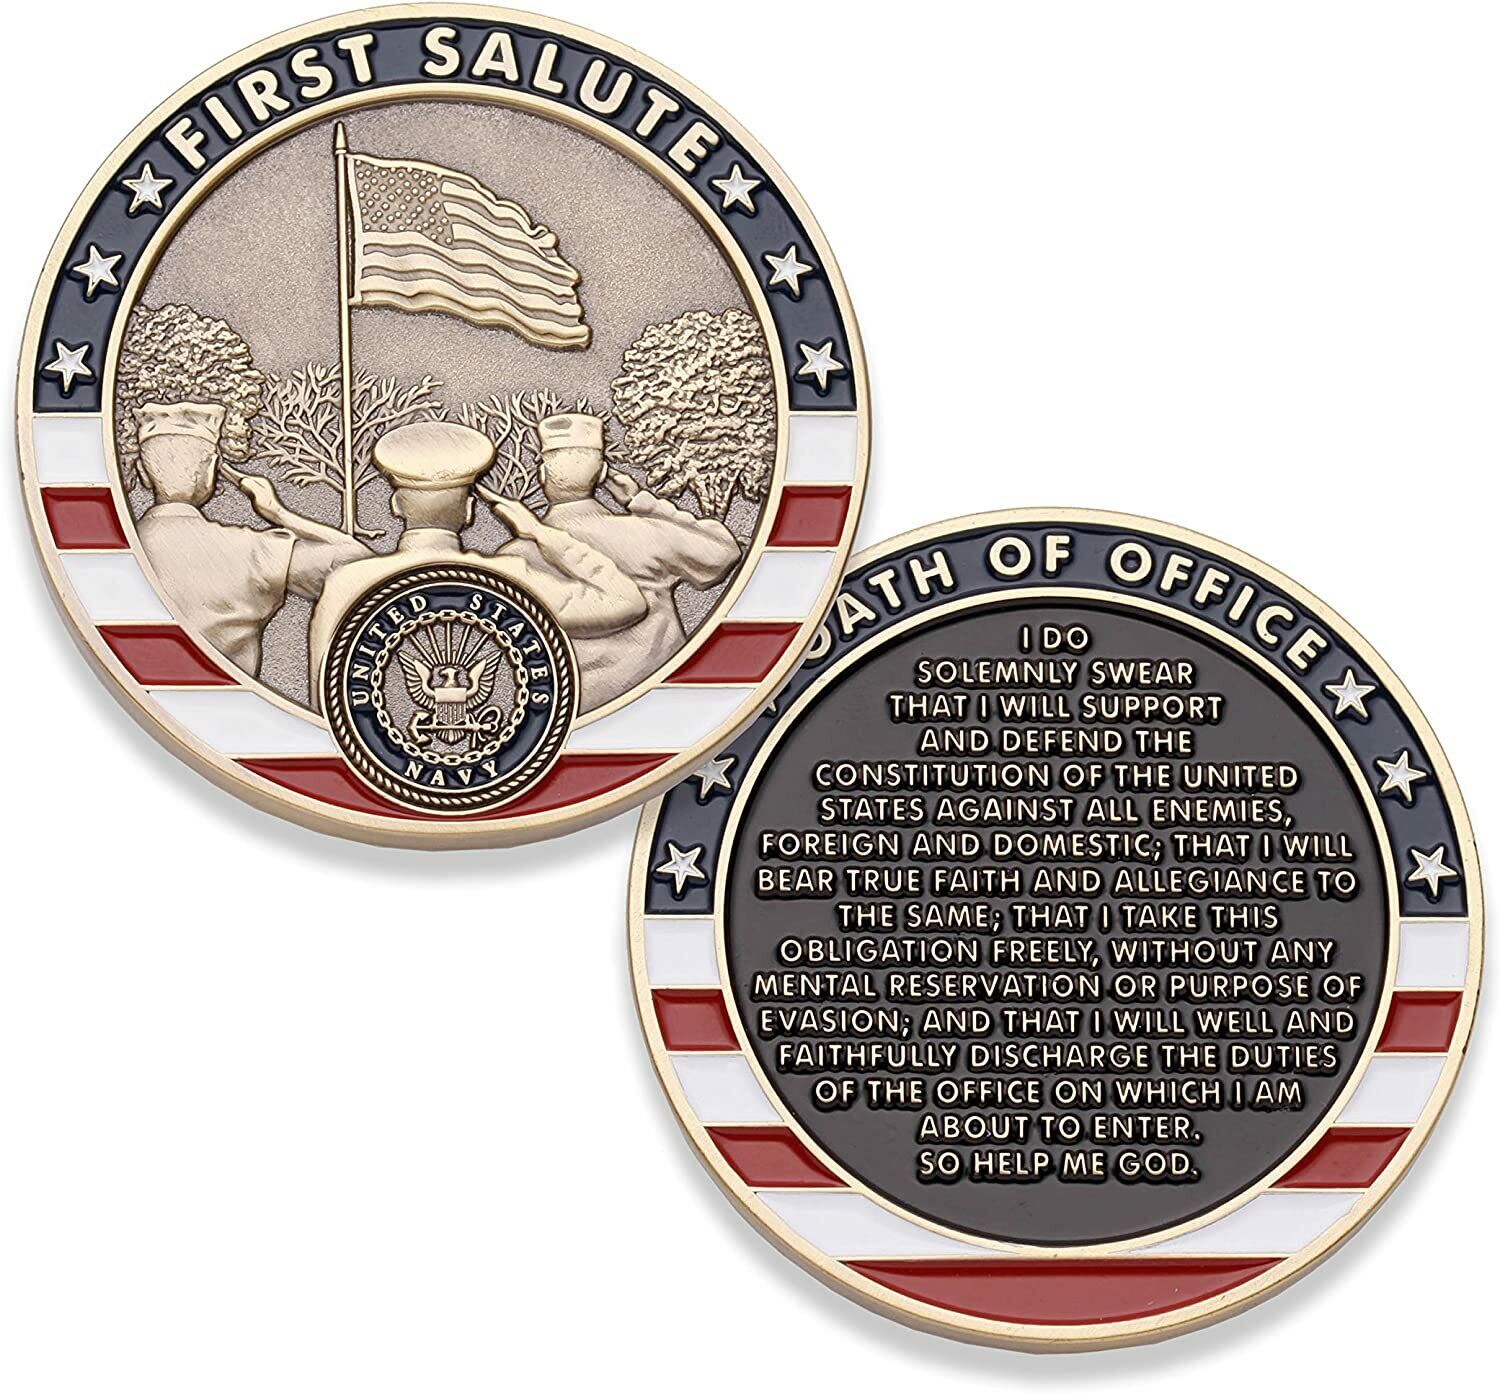 United States Navy First Salute Challenge Coin